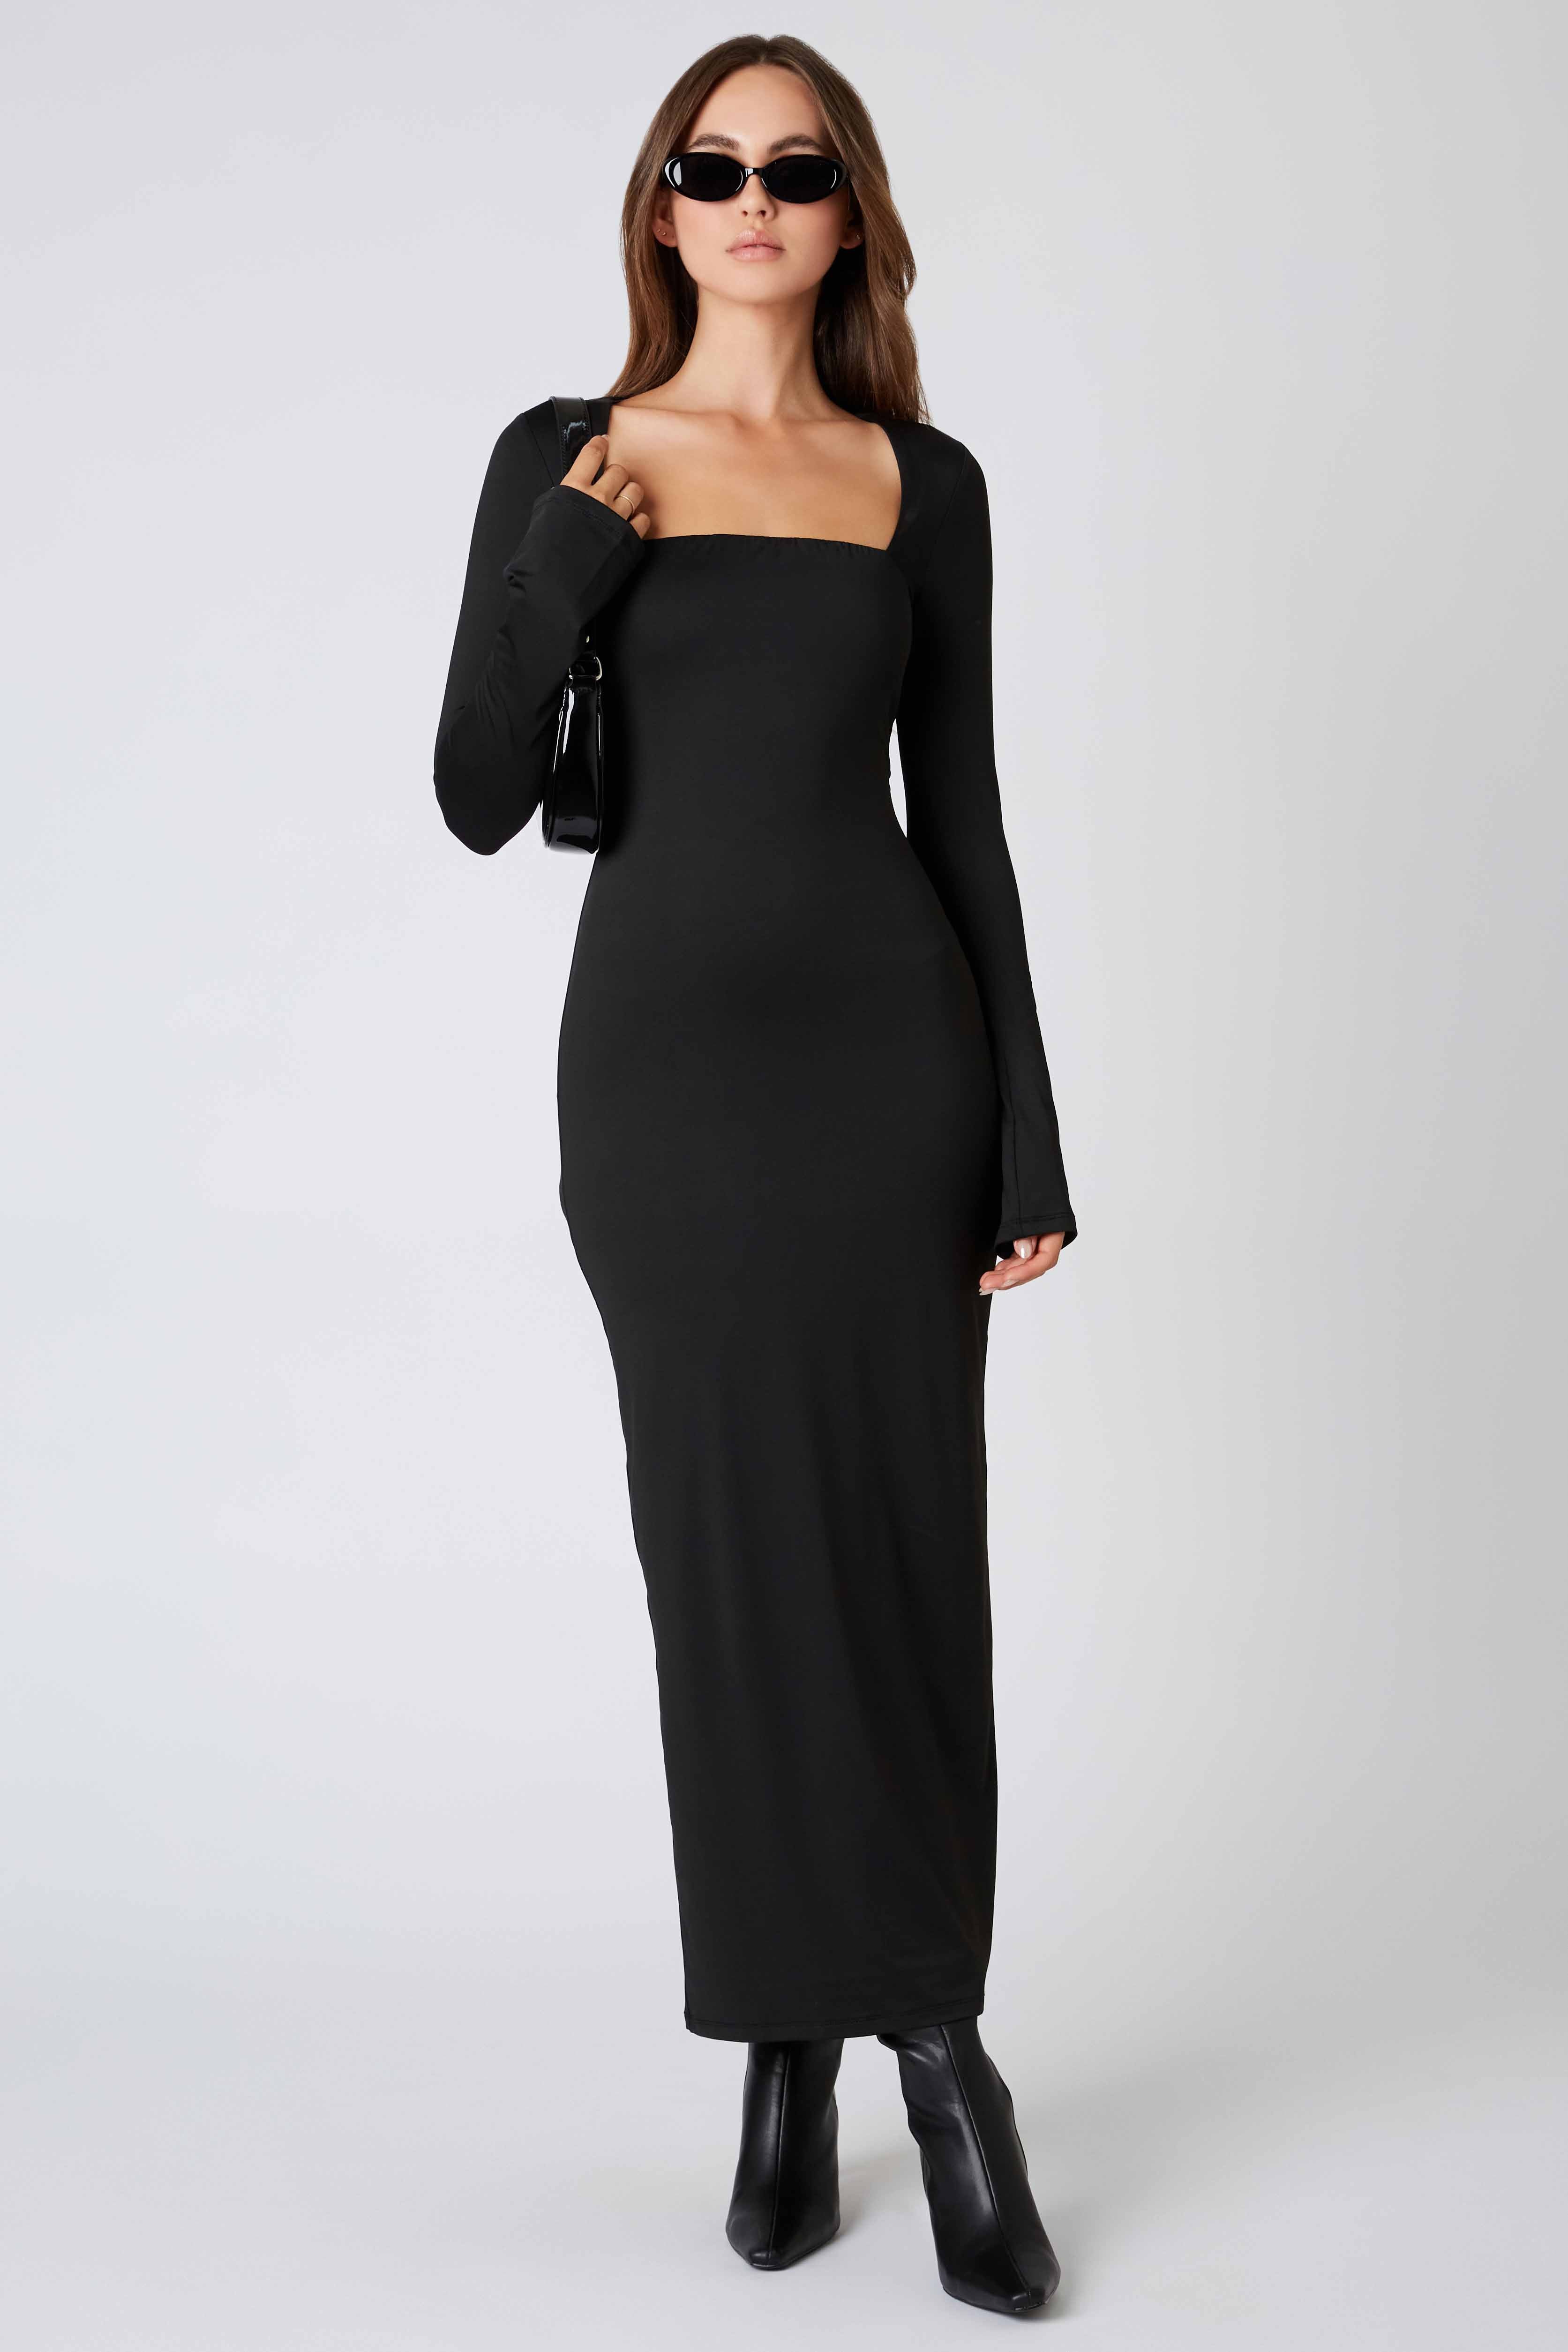 Long Sleeve Maxi Dress in Black Front View